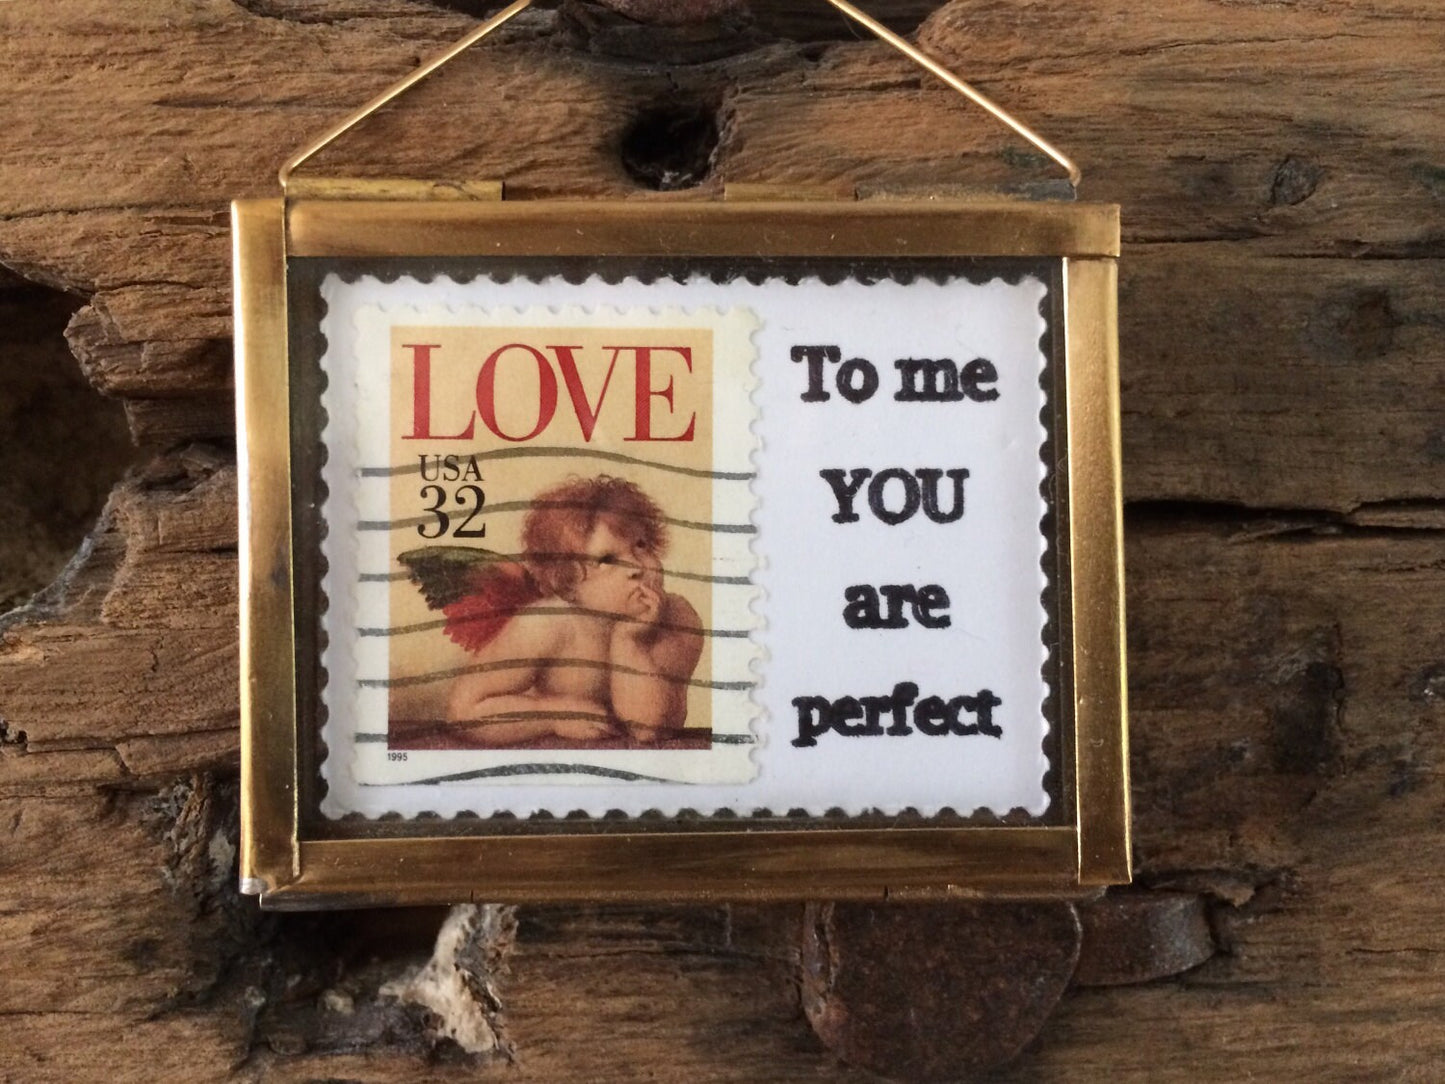 To me you are perfect (1995)